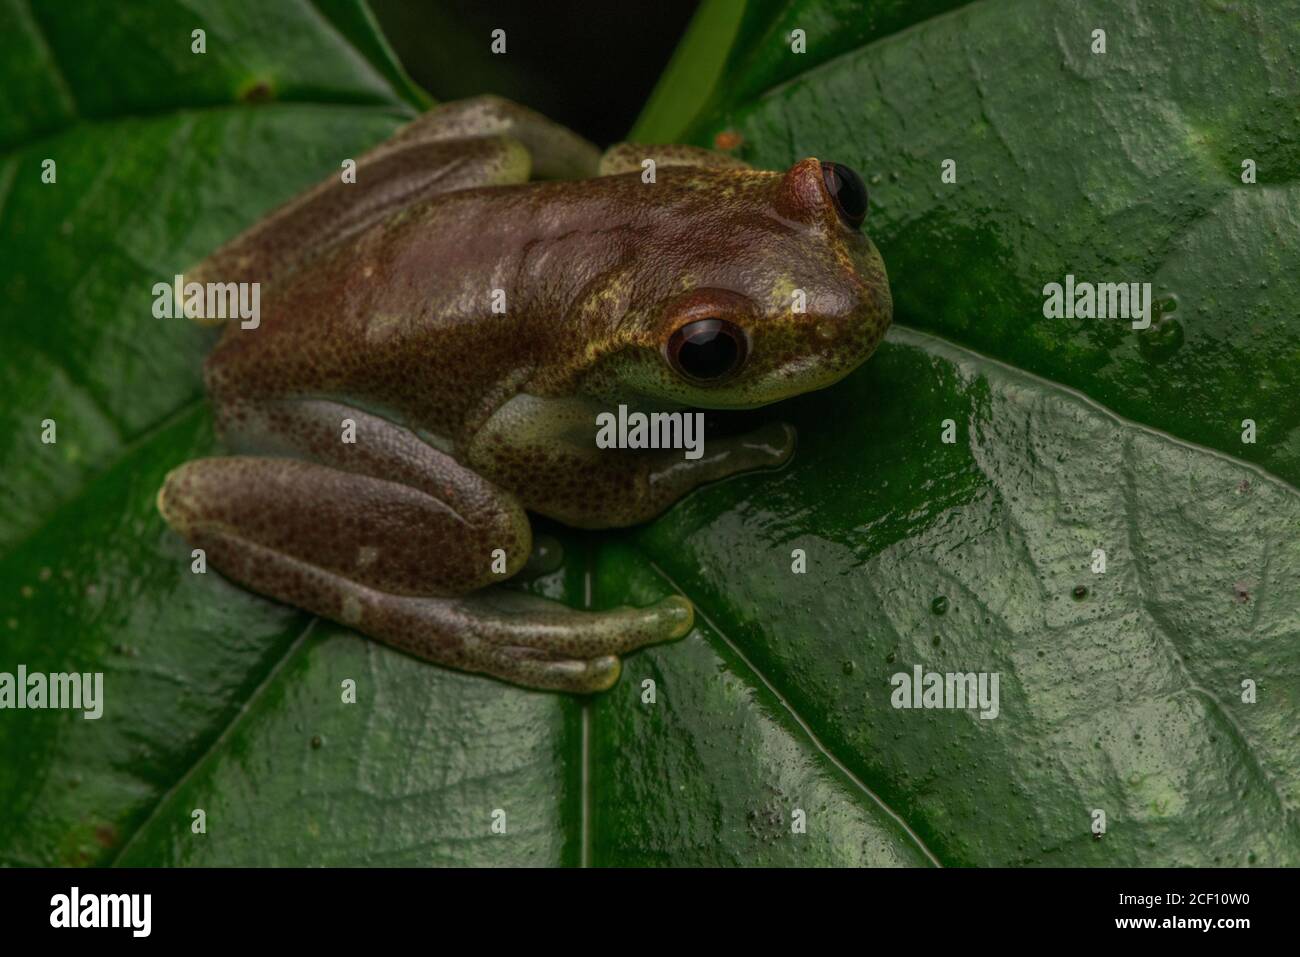 Babbling torrenteer frog (Hyloscirtus alytolylax) a species of tree frog from the Choco region of Ecuador. Stock Photo